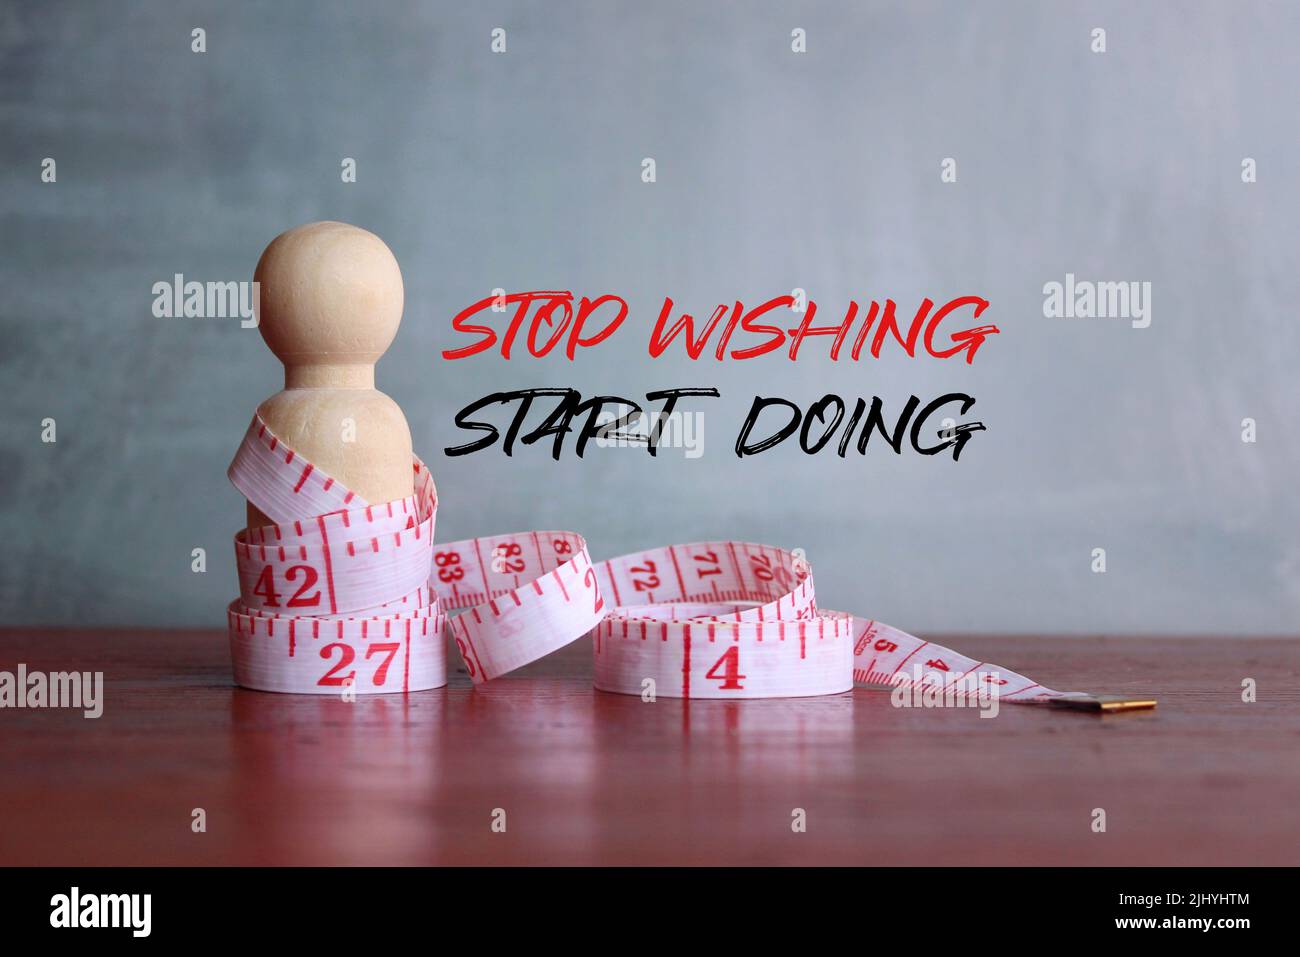 Fitness and motivational quotes. Wooden doll and measuring tape with text 'STOP WISHING START DOING' Stock Photo